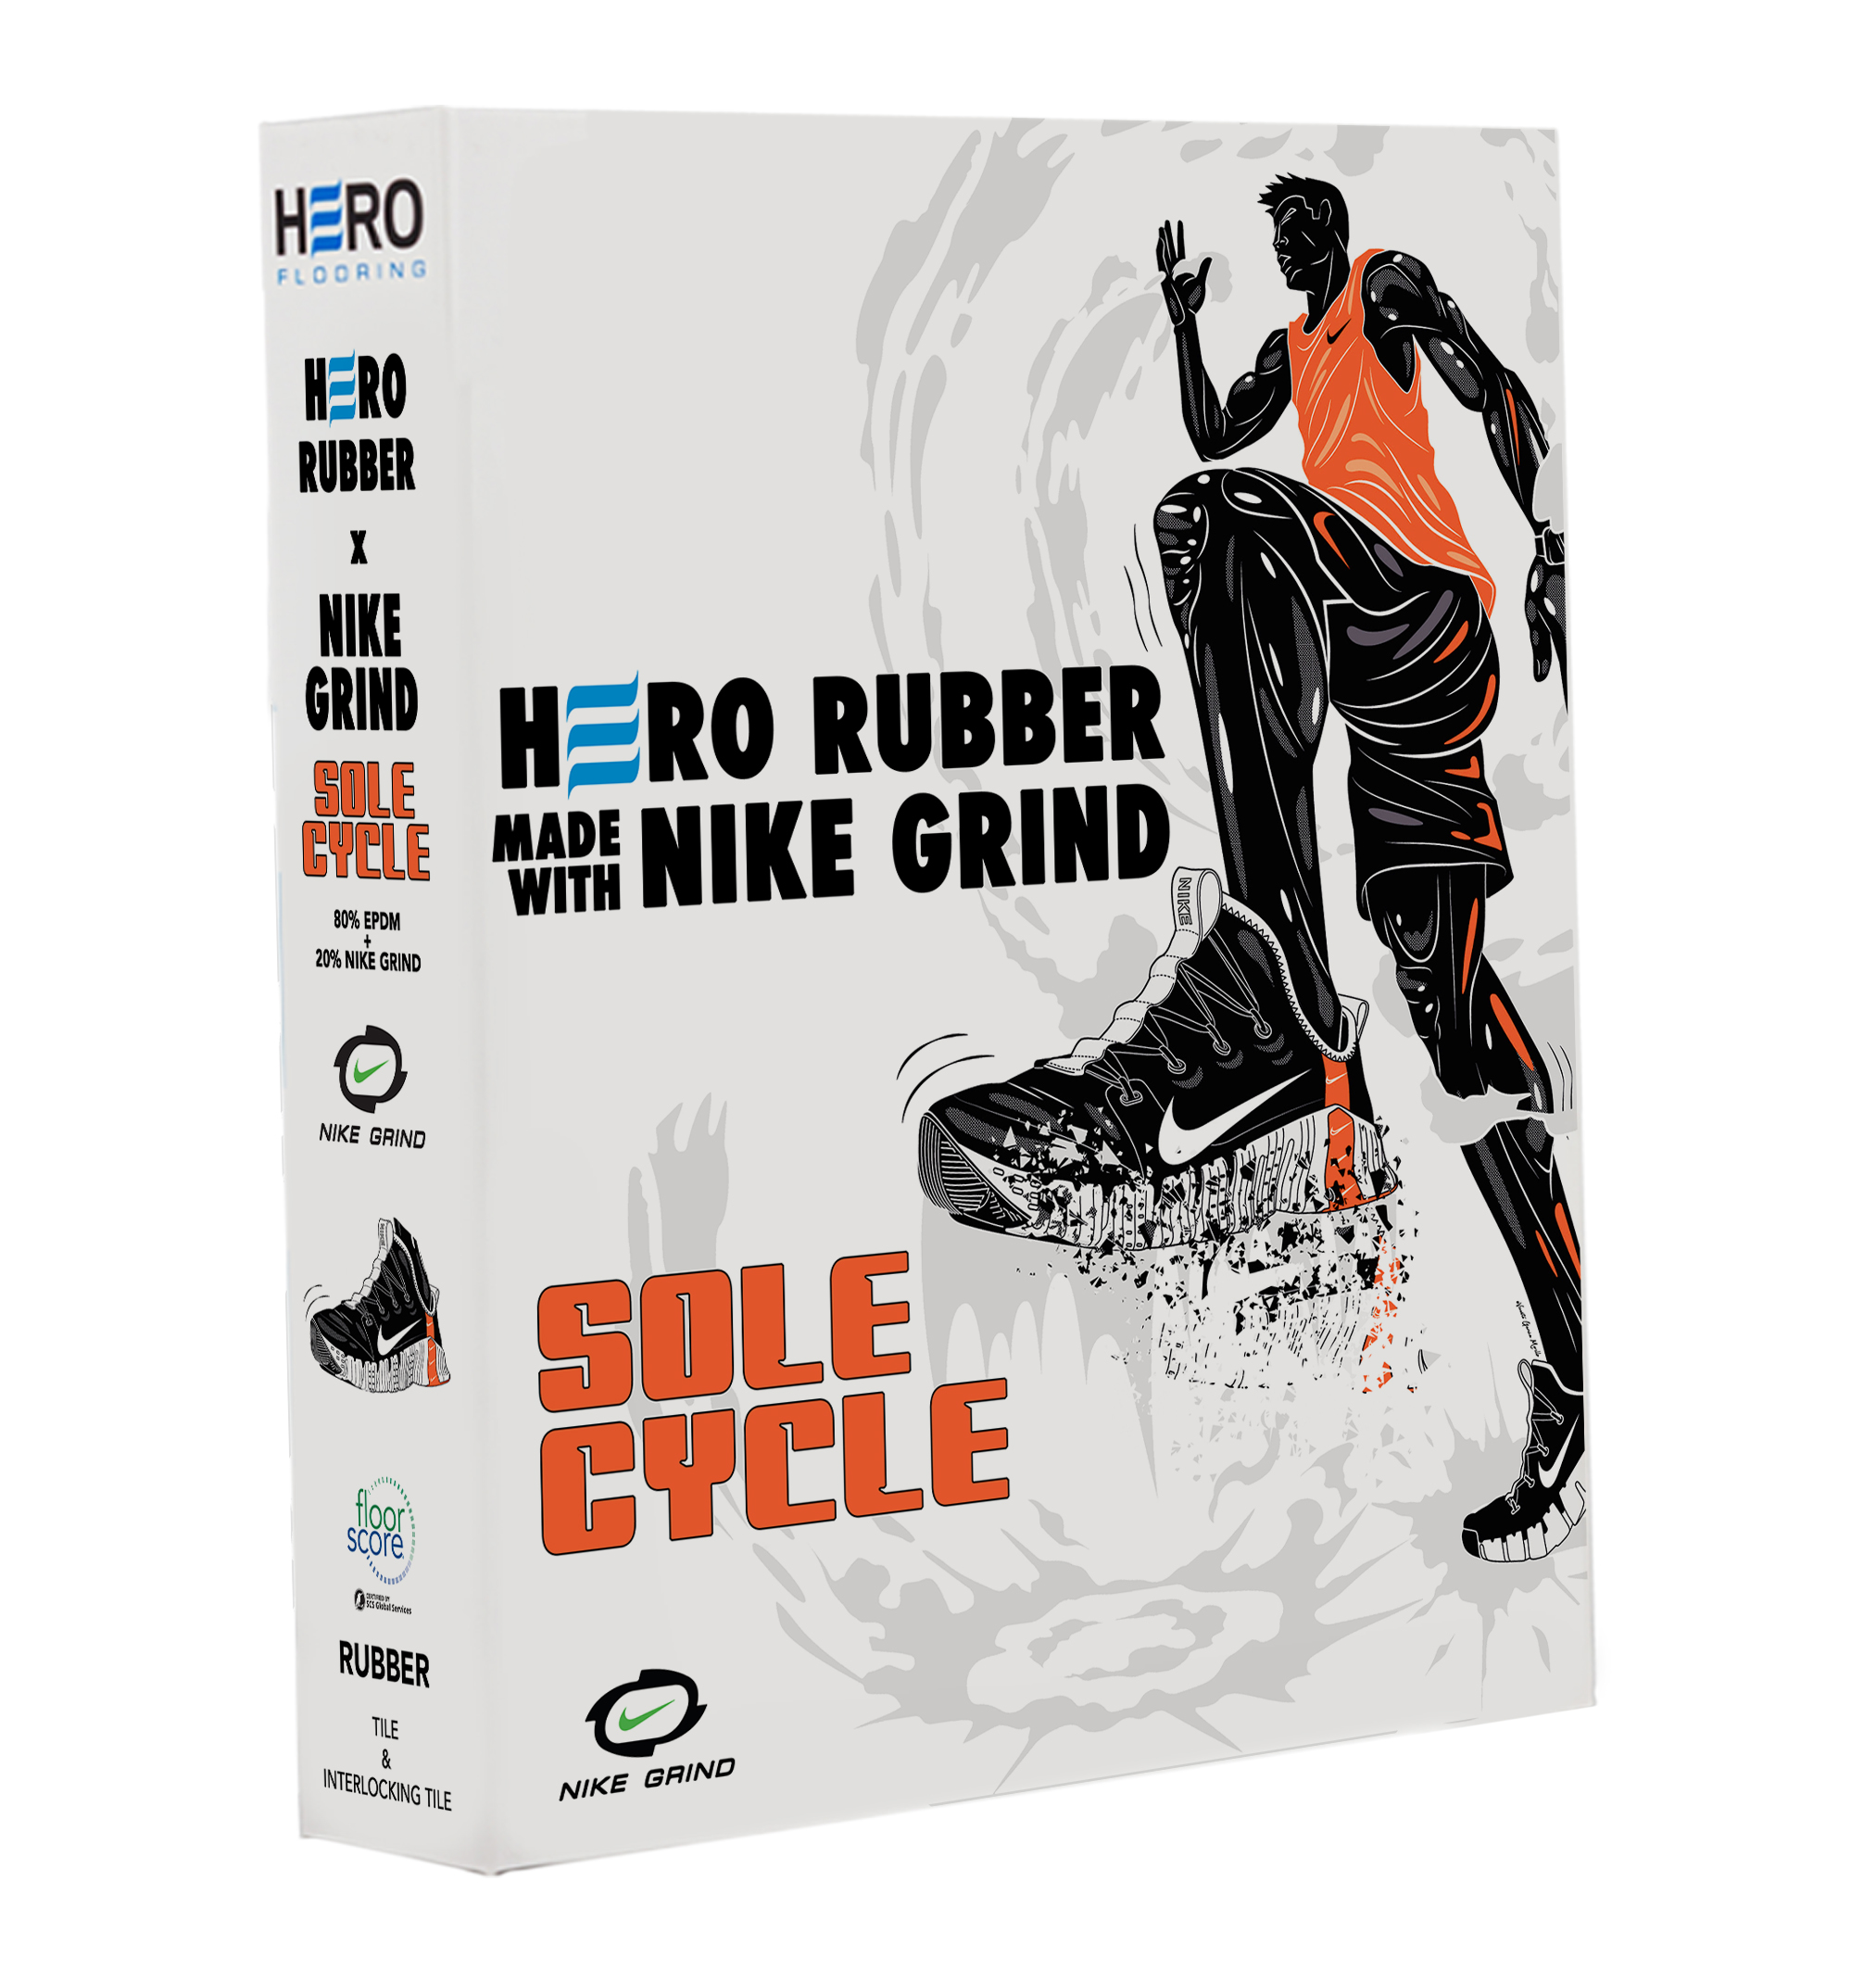 Rubber with Nike Grind-Sole Cycle Architect – Hero Flooring